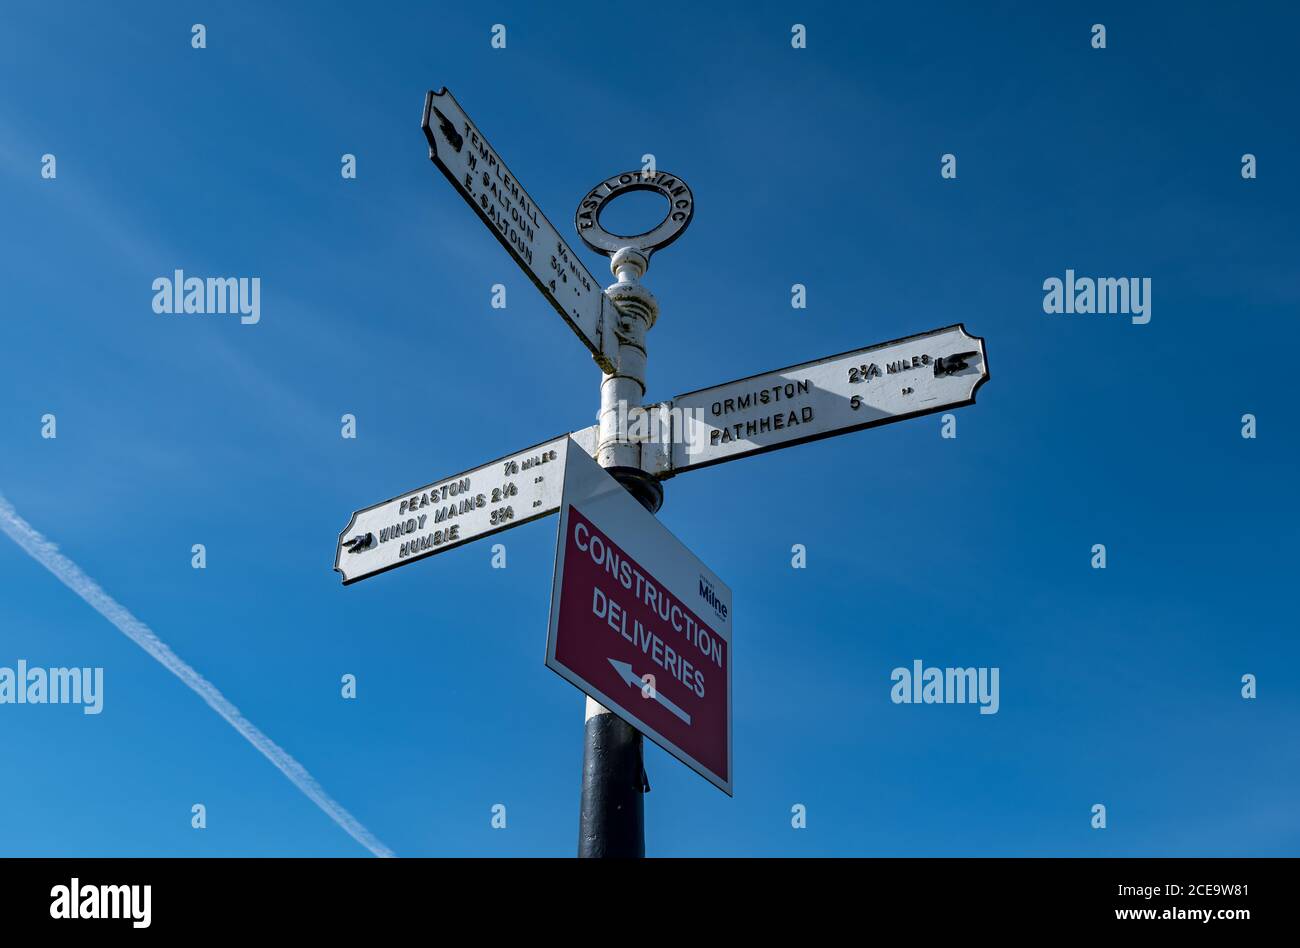 Old fashioned signpost with hand pointing to villages with distances in miles, East Lothian, Scotland, UK Stock Photo